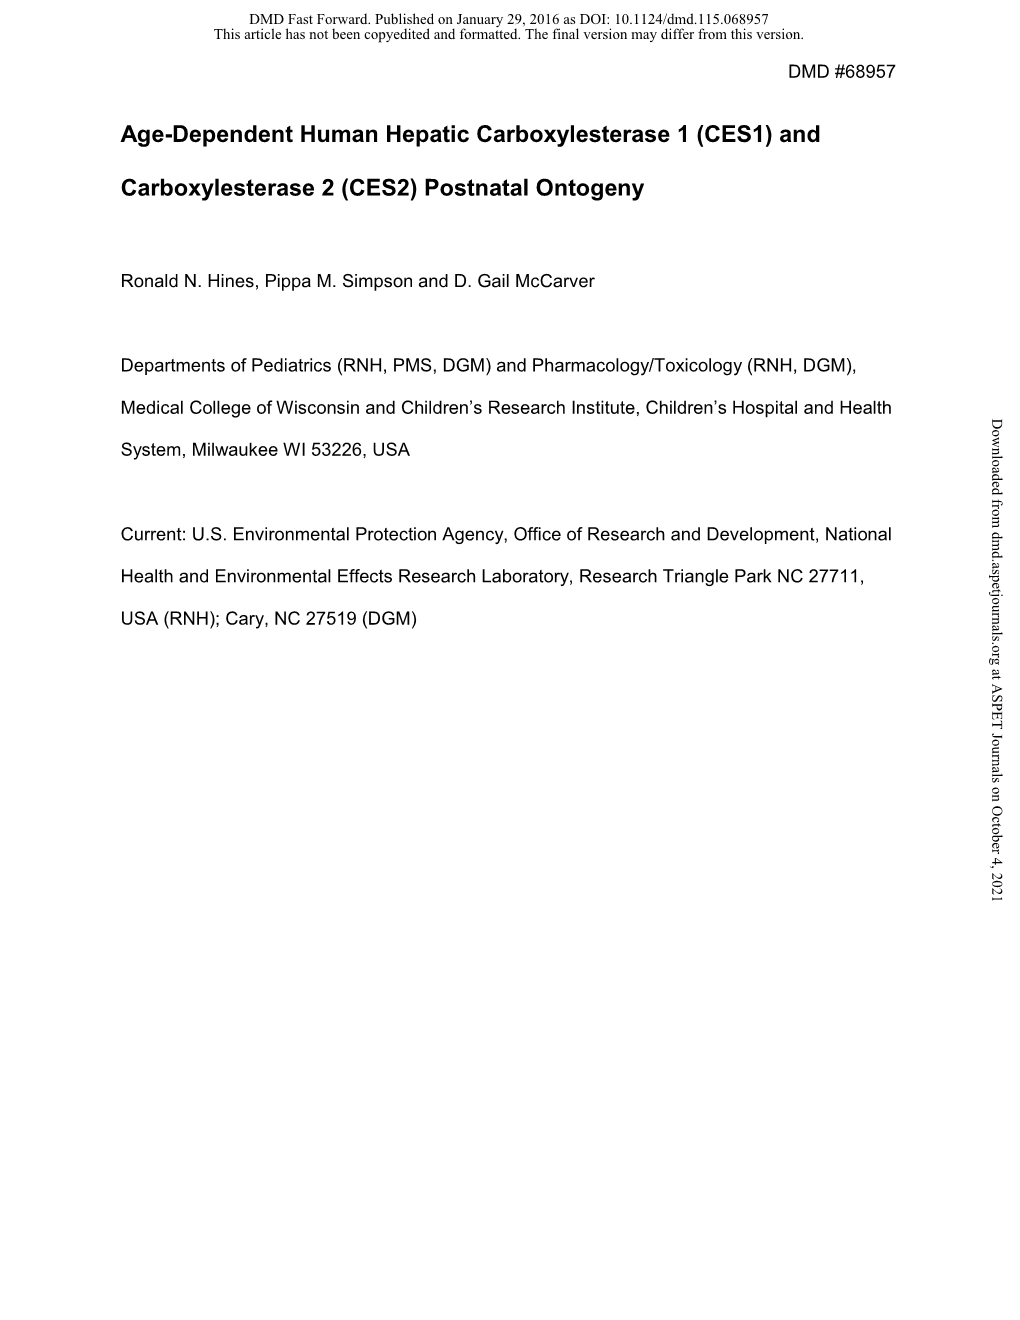 (CES1) and Carboxylesterase 2 (CES2) Postnatal Ontogeny